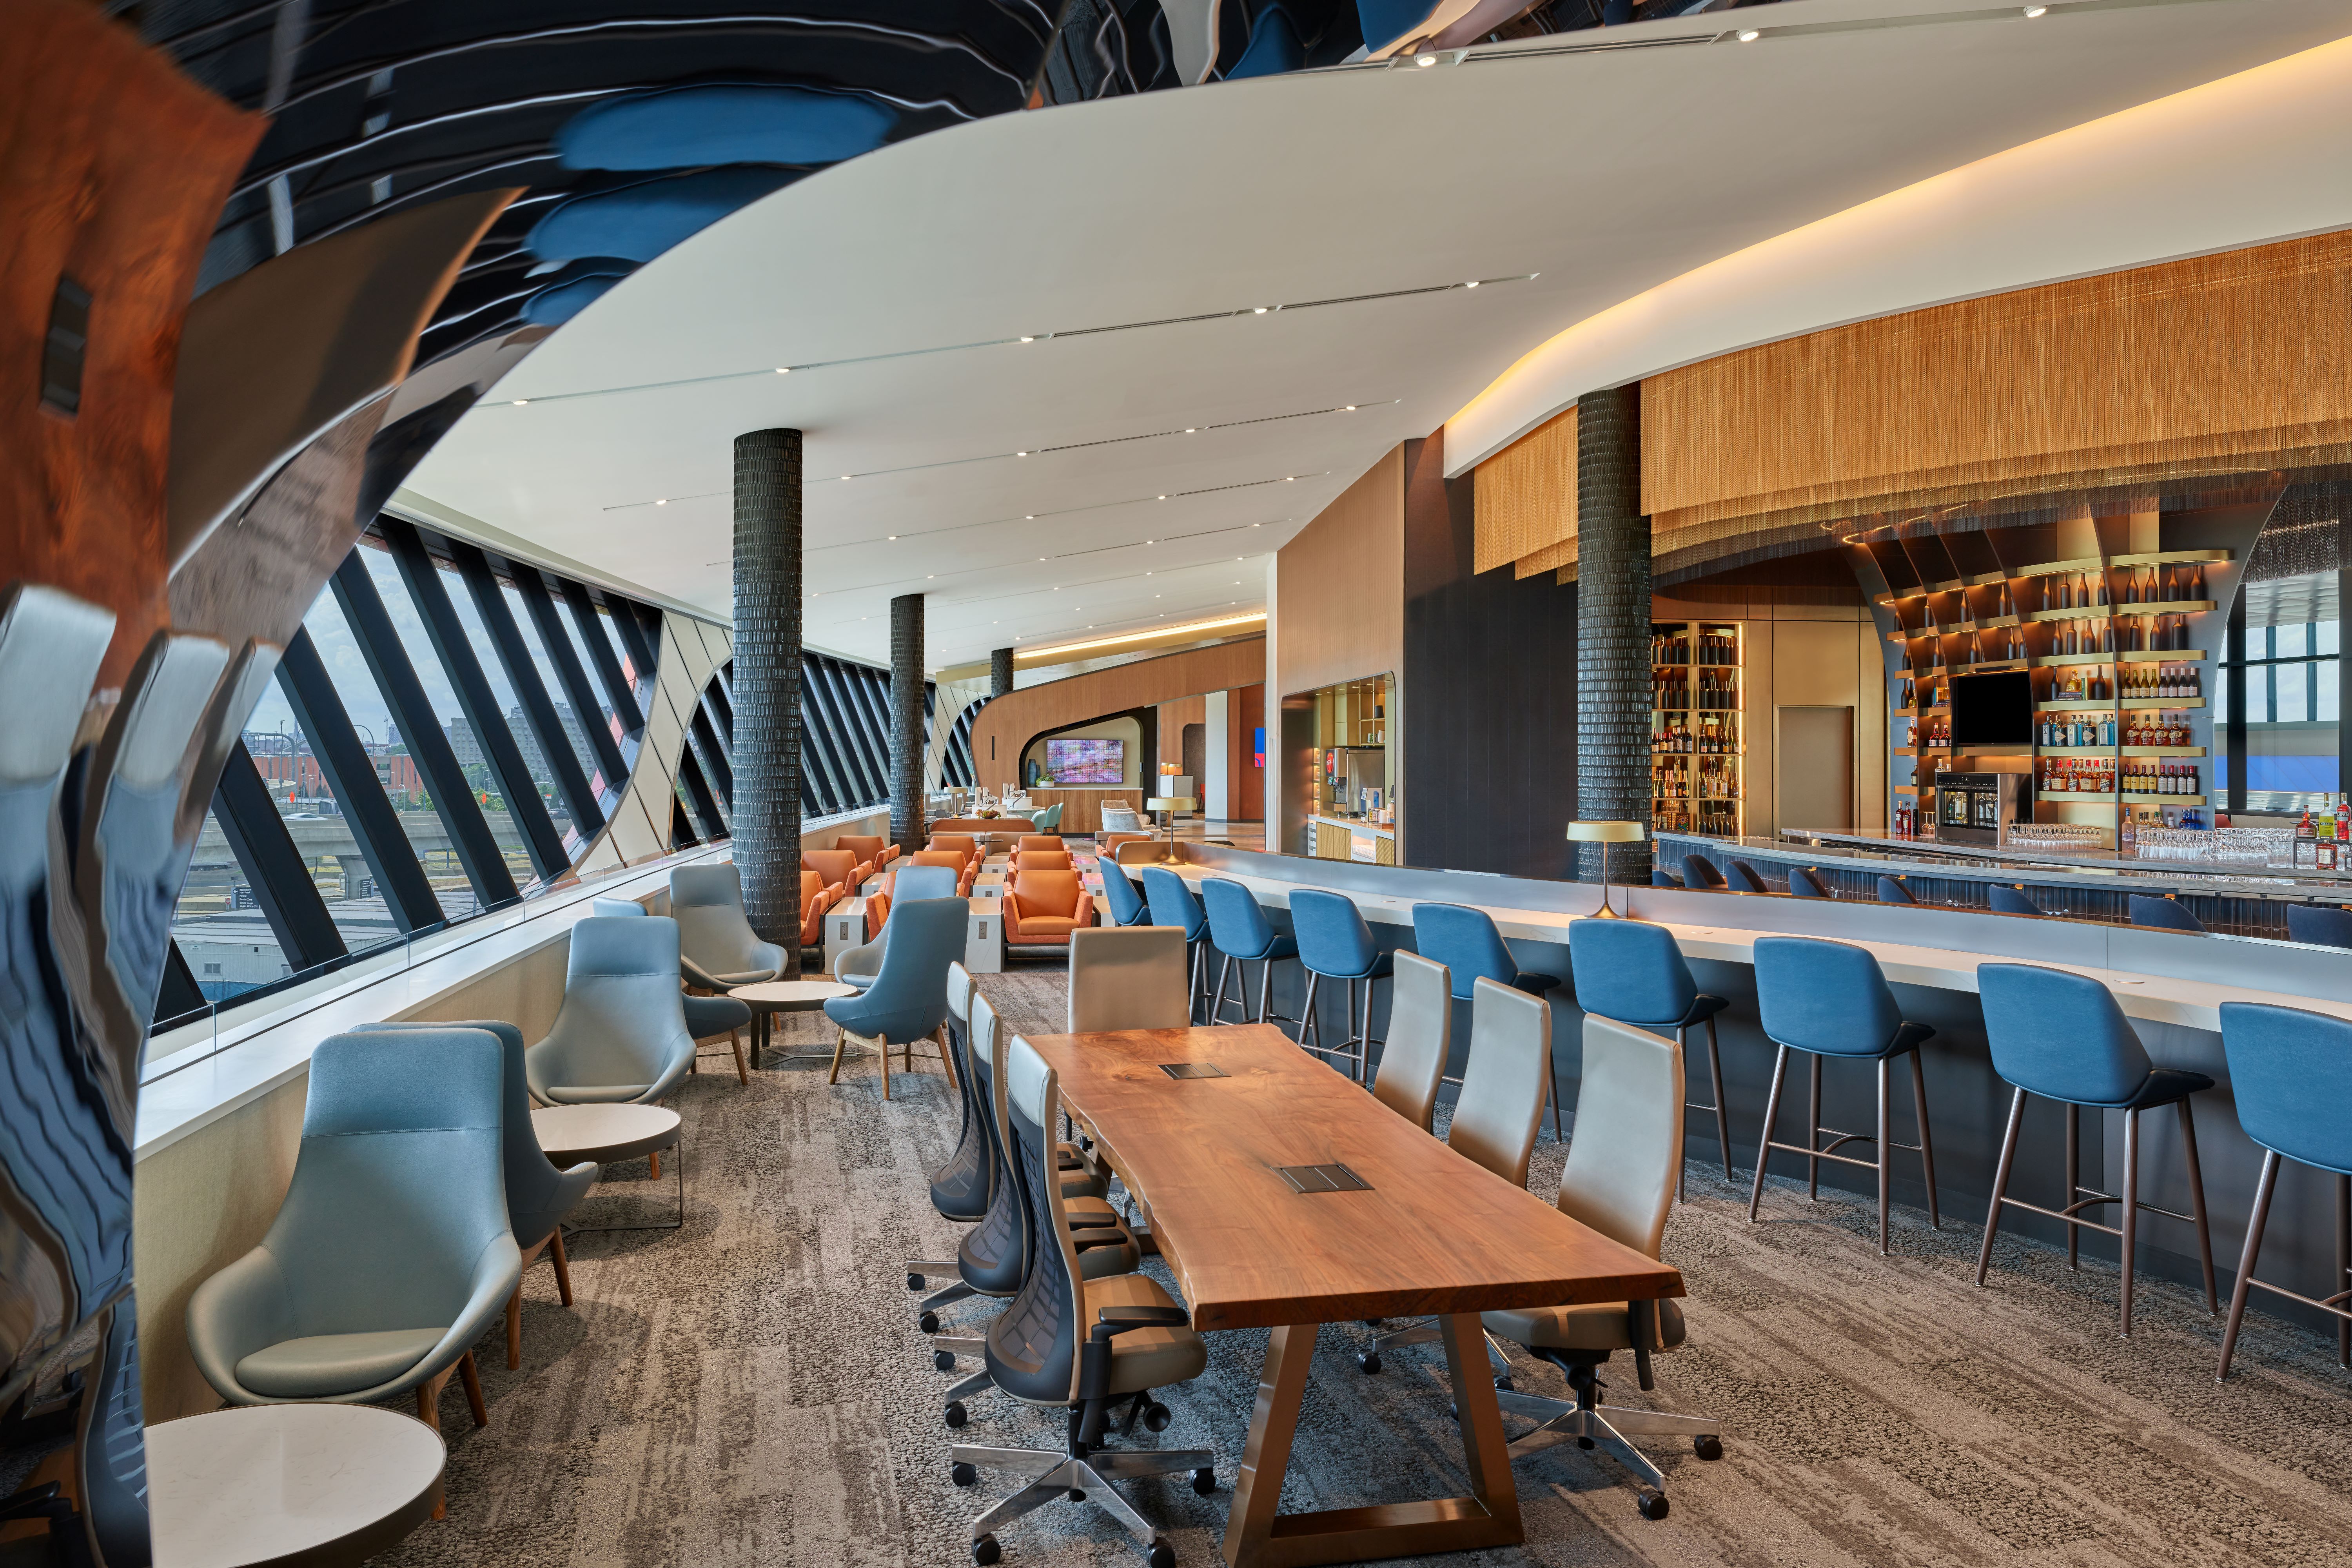 The lounge design takes inspiration from the famous harbor itself, incorporating colors and textures reminiscent of Boston’s nautical history. 